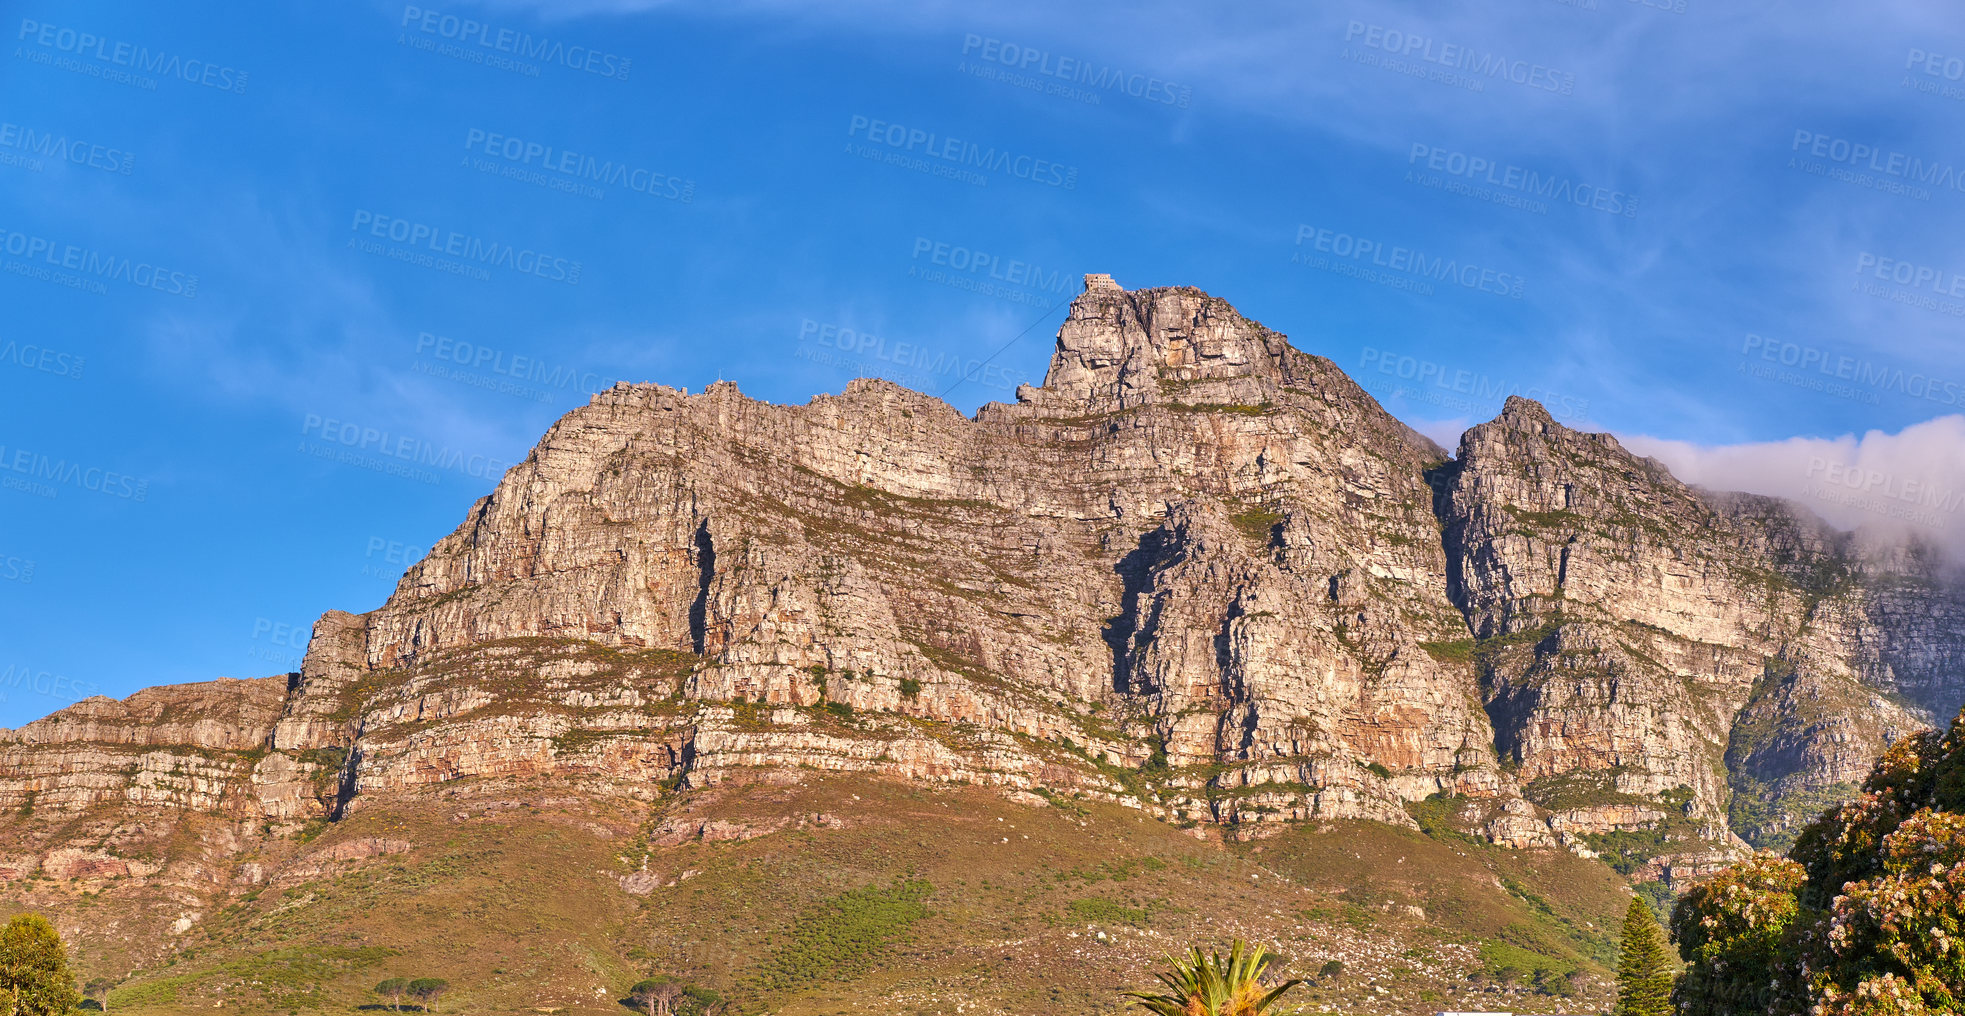 Buy stock photo Low angle view of Table Mountain against a bright blue sky. Rocky mountain peak in South Africa. Scenic landscape of a remote hiking location on a sunny day. Travel and explore nature on adventure